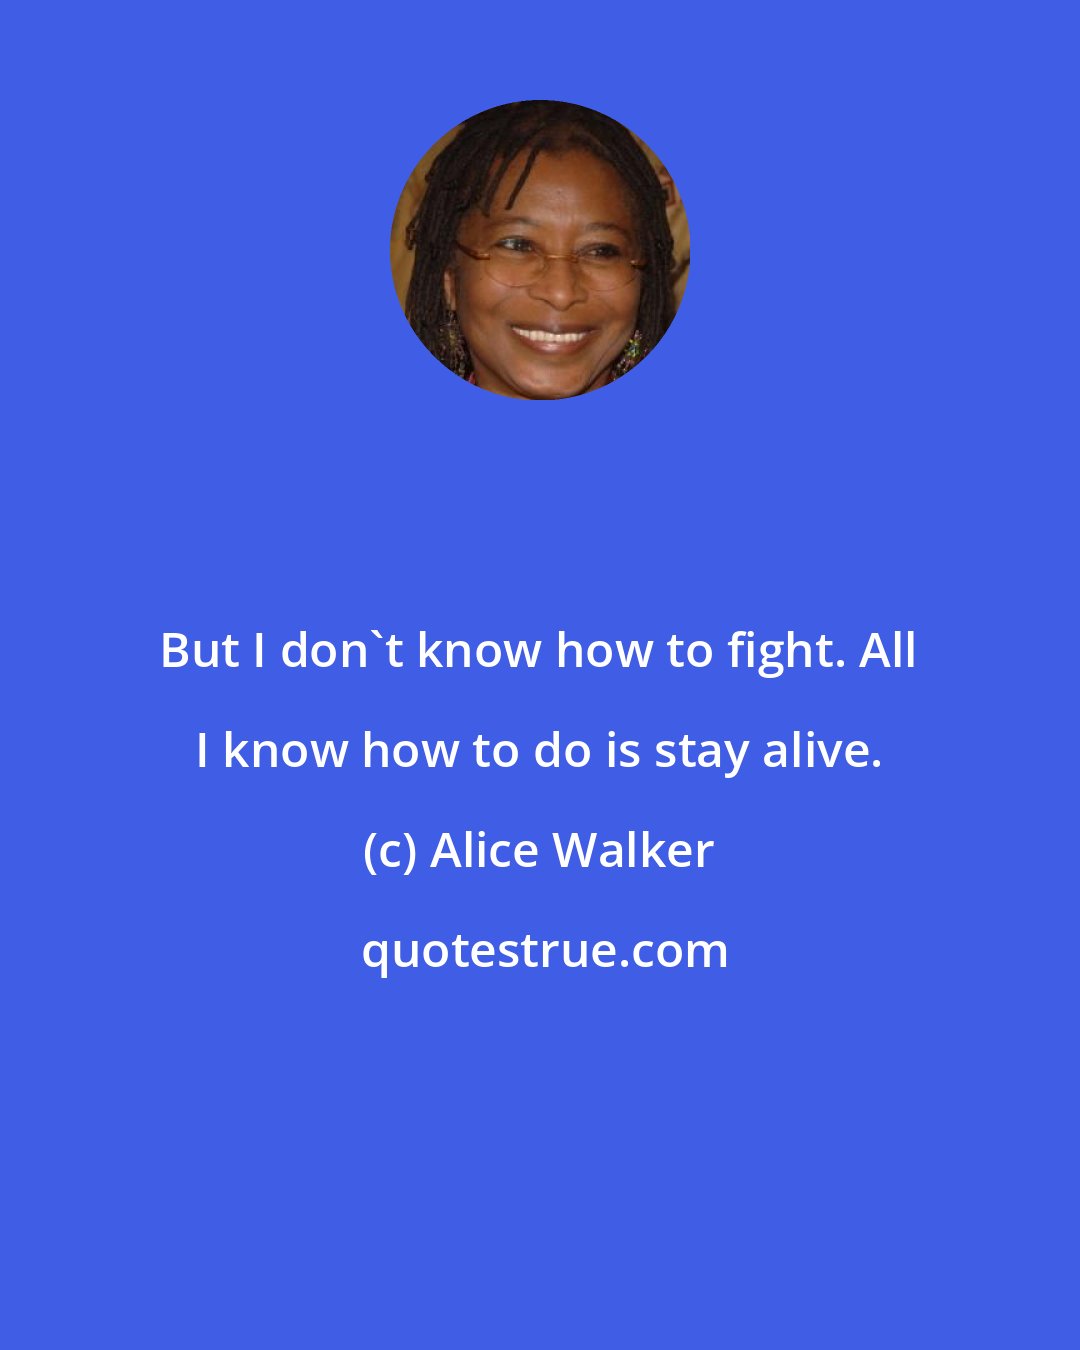 Alice Walker: But I don't know how to fight. All I know how to do is stay alive.